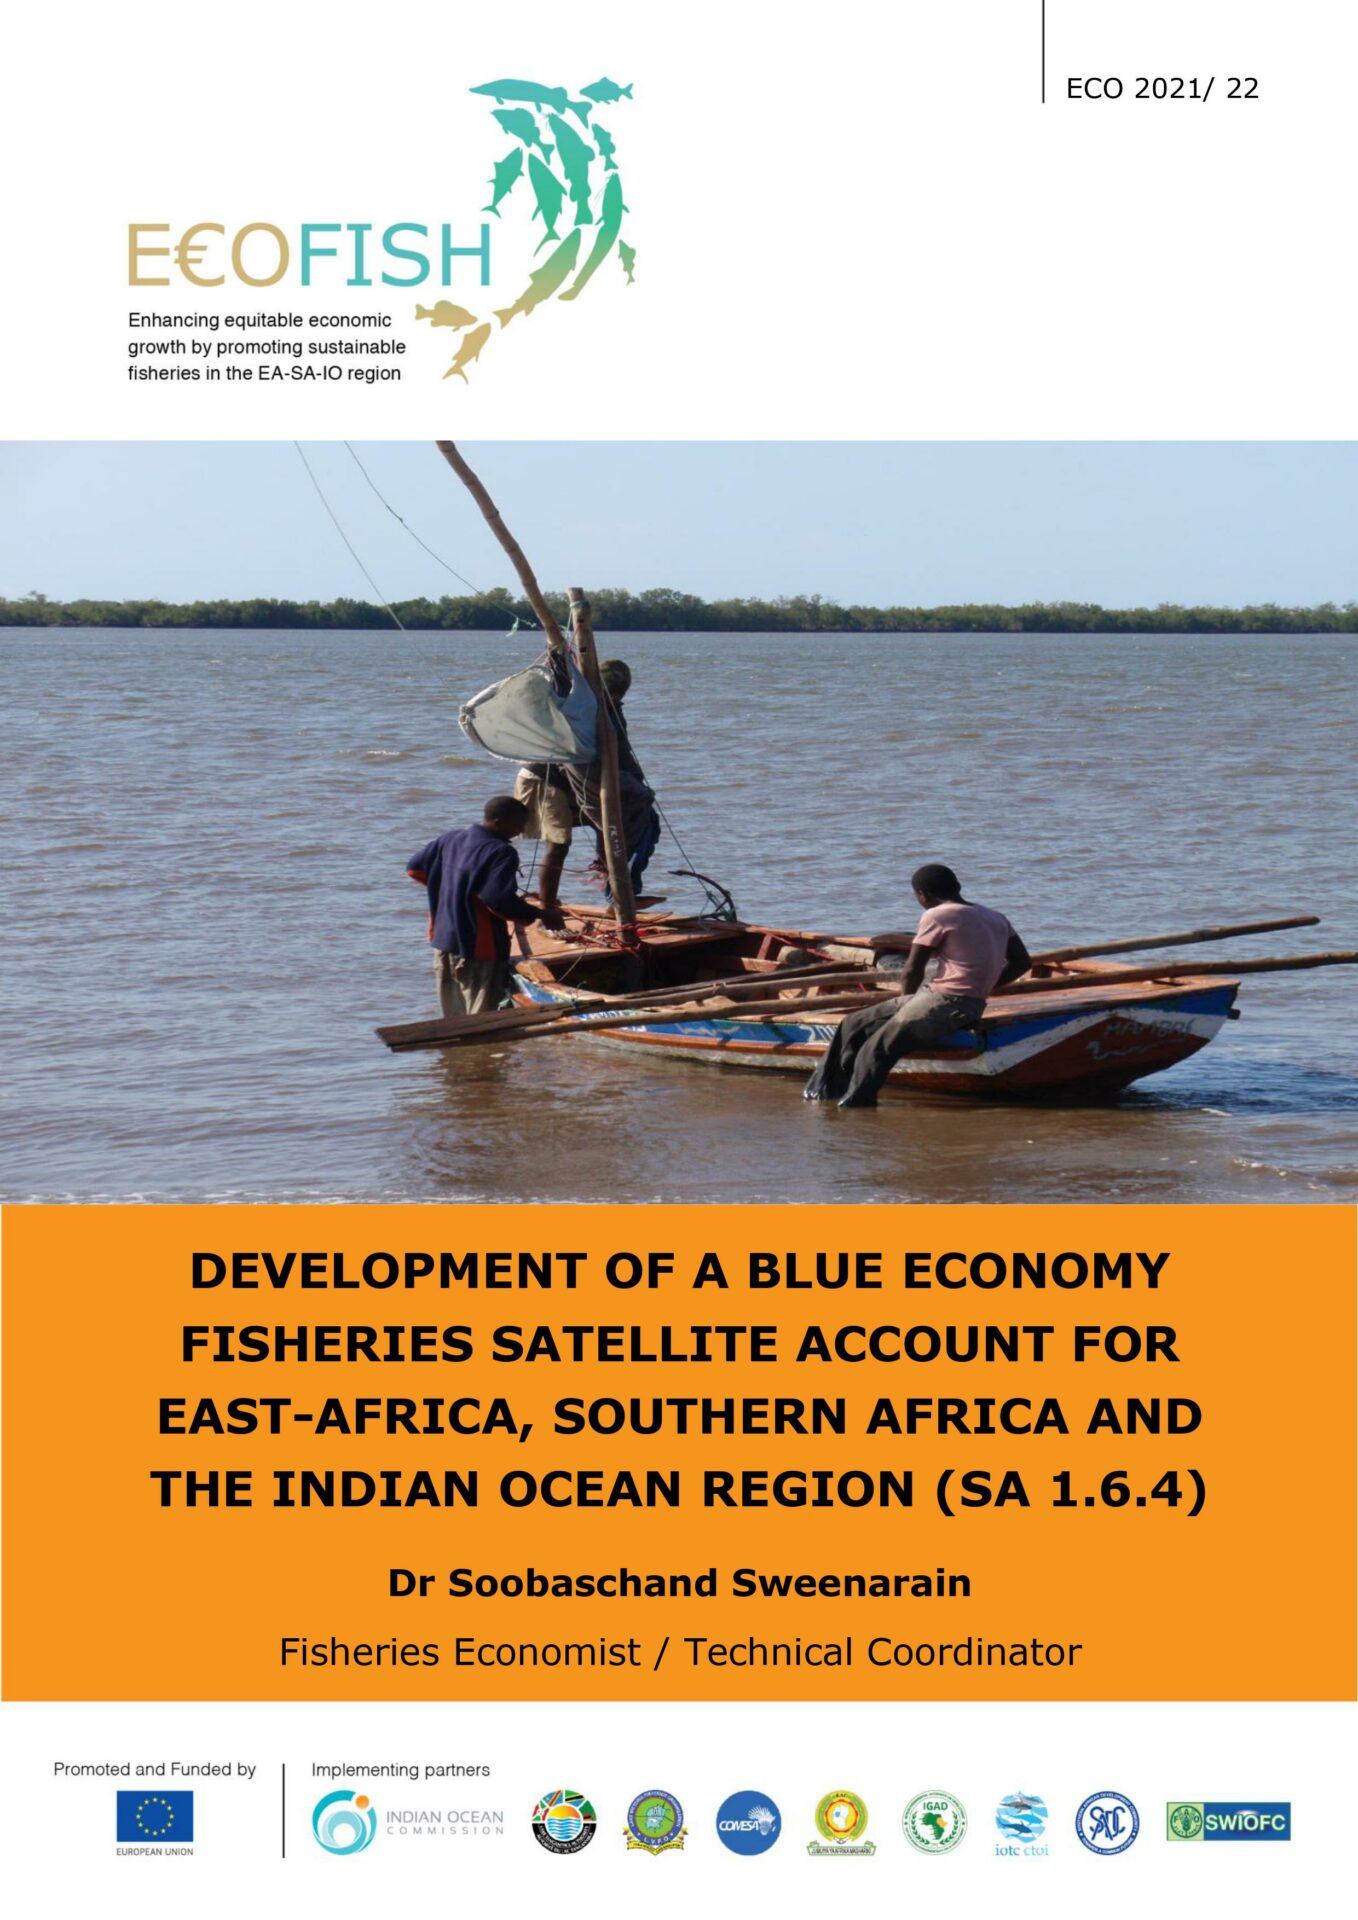 DEVELOPMENT OF A BLUE ECONOMY FISHERIES SATELLITE ACCOUNT FOR EAST-AFRICA, SOUTHERN AFRICA AND THE INDIAN OCEAN REGION